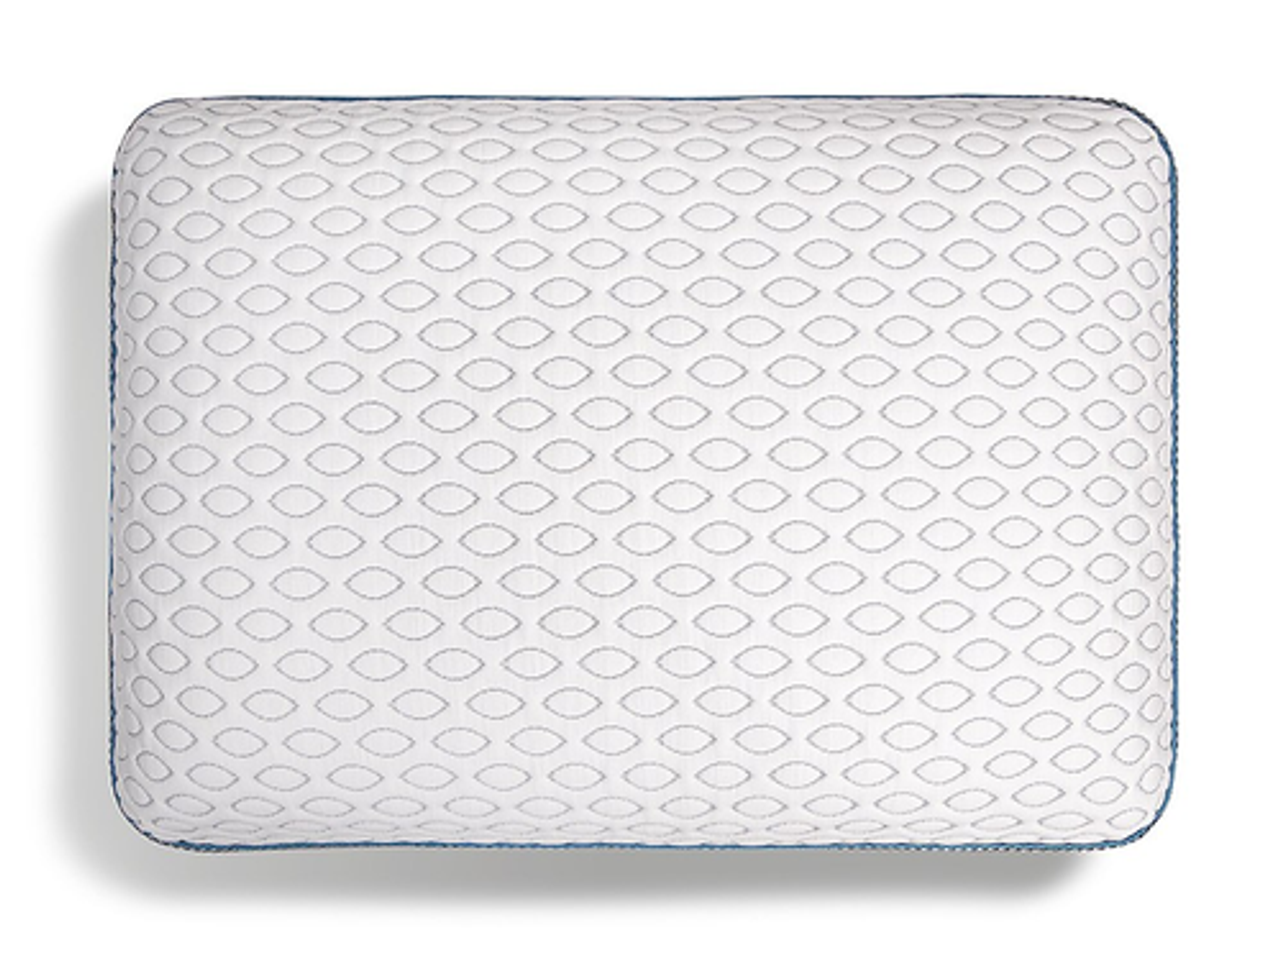 Bedgear - Frost Performance Pillow 2.0 - White